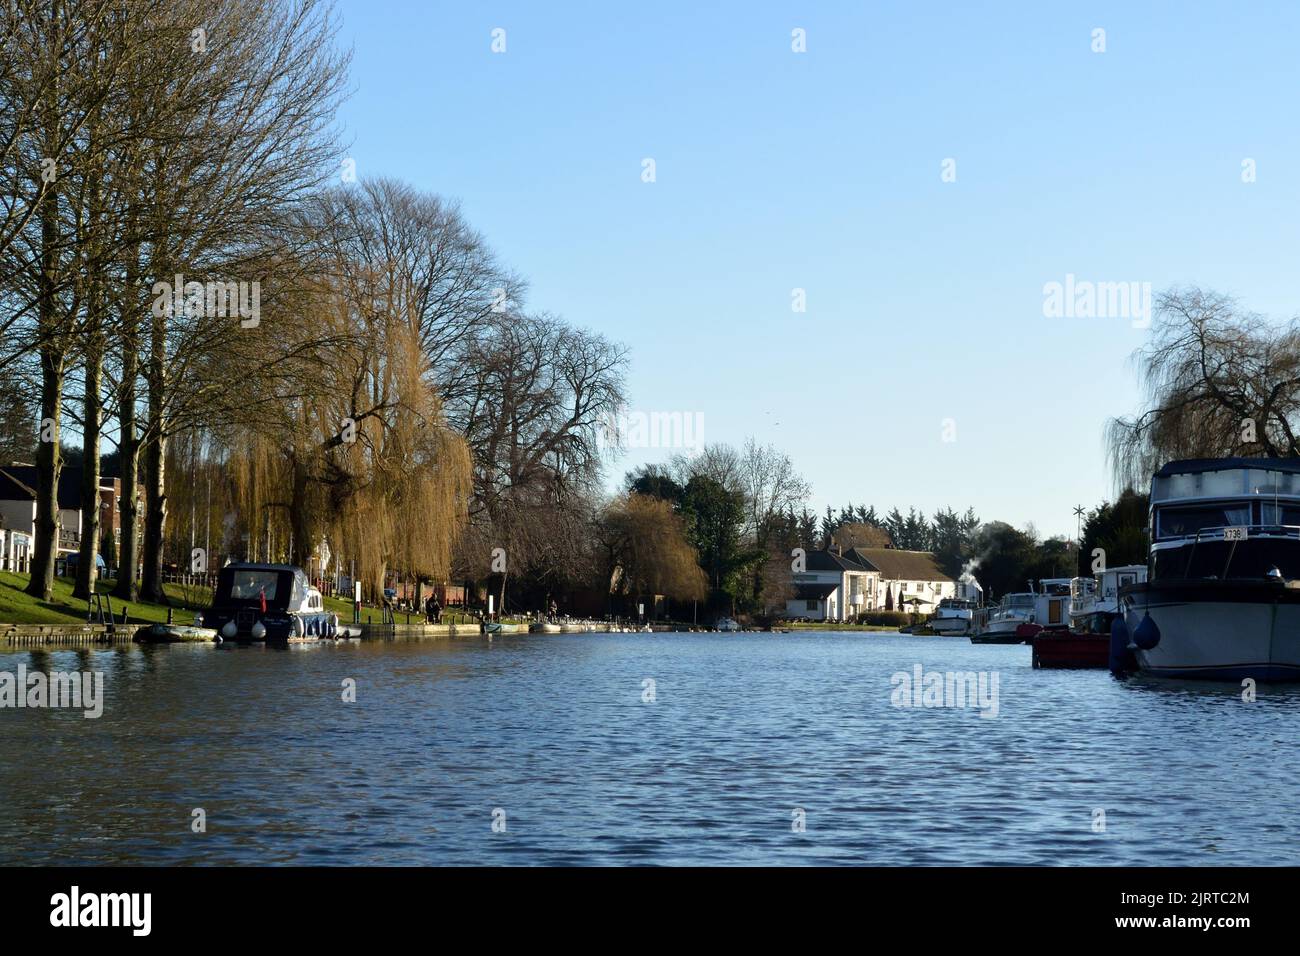 The River Yare at Thorpe Green, with the Rushcutters pub in the background, on the outskirts of Norwich, Norfolk, UK. Stock Photo